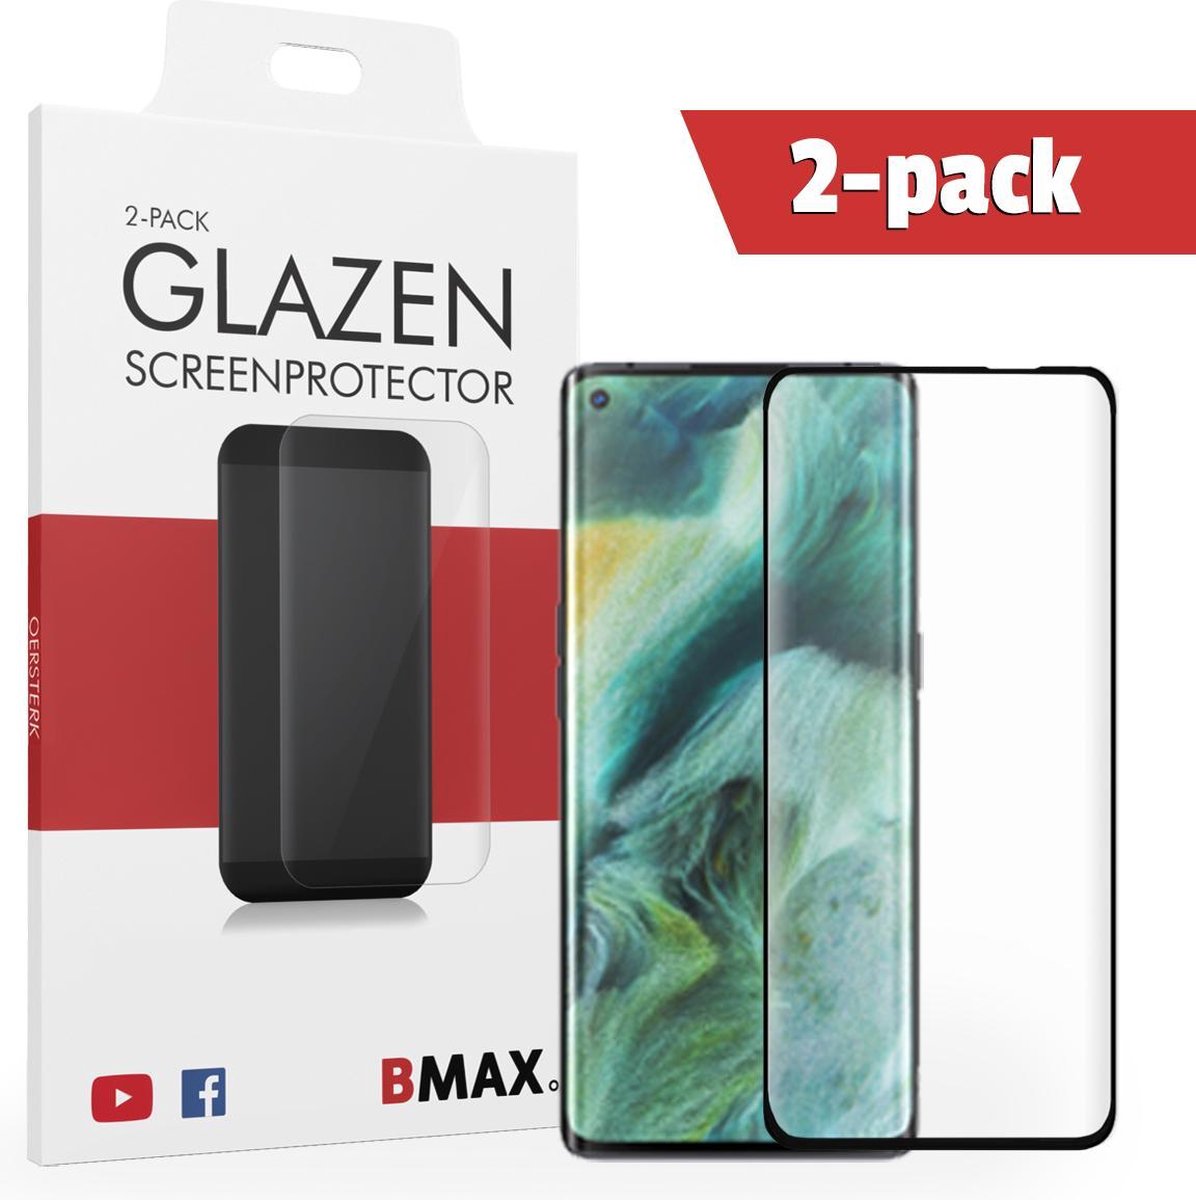 2-pack Bmax Oppo Find X2 Pro Screenprotector - Glass - Full Cover 5d - Black